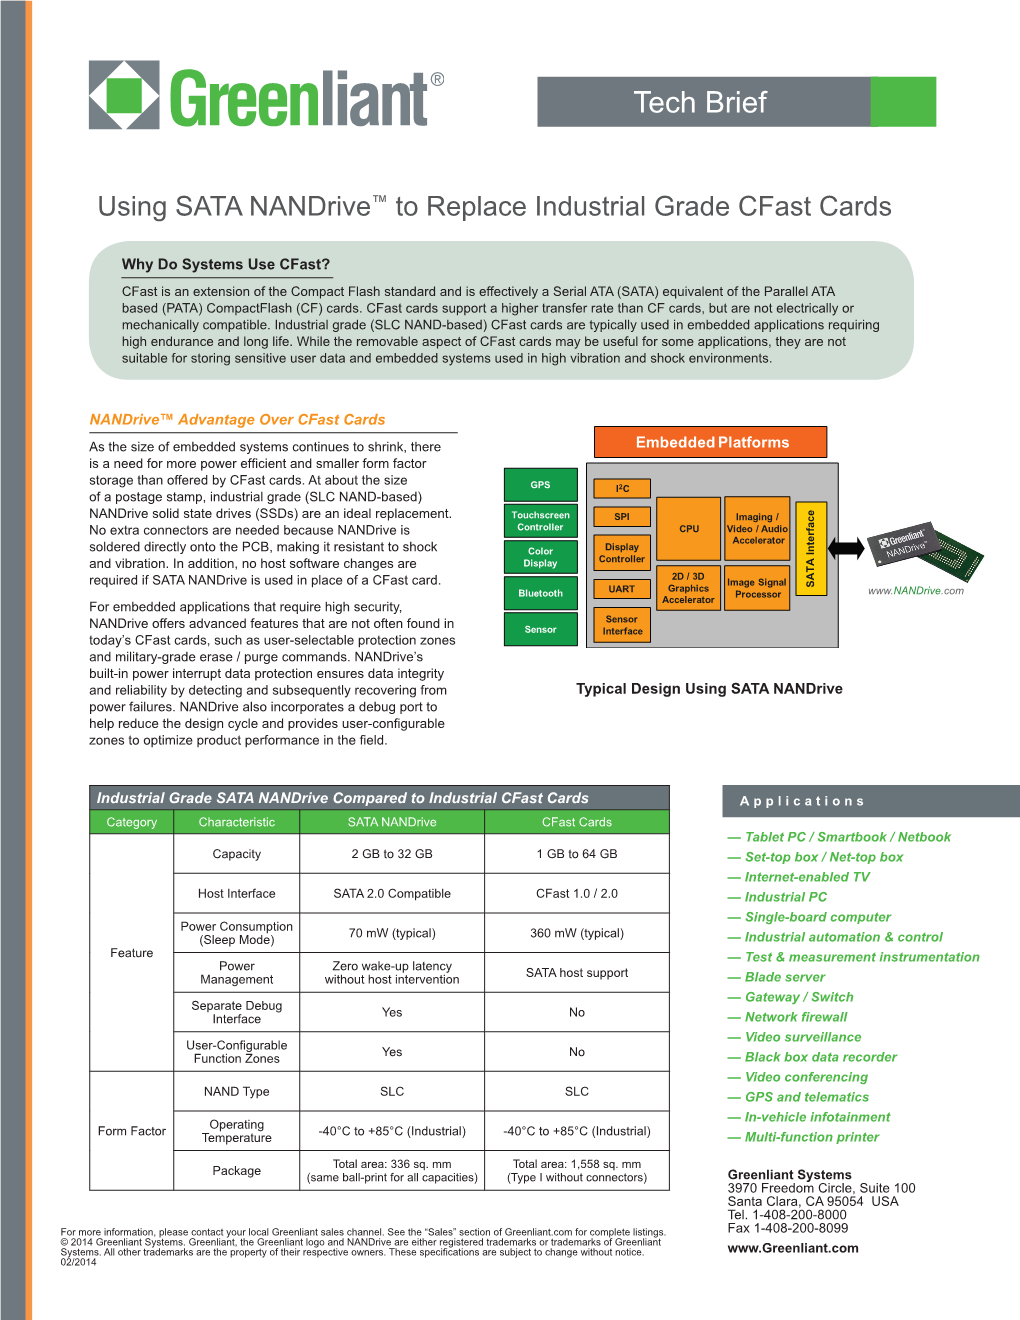 Tech Brief: Using SATA Nandrive to Replace Industrial Cfast Cards